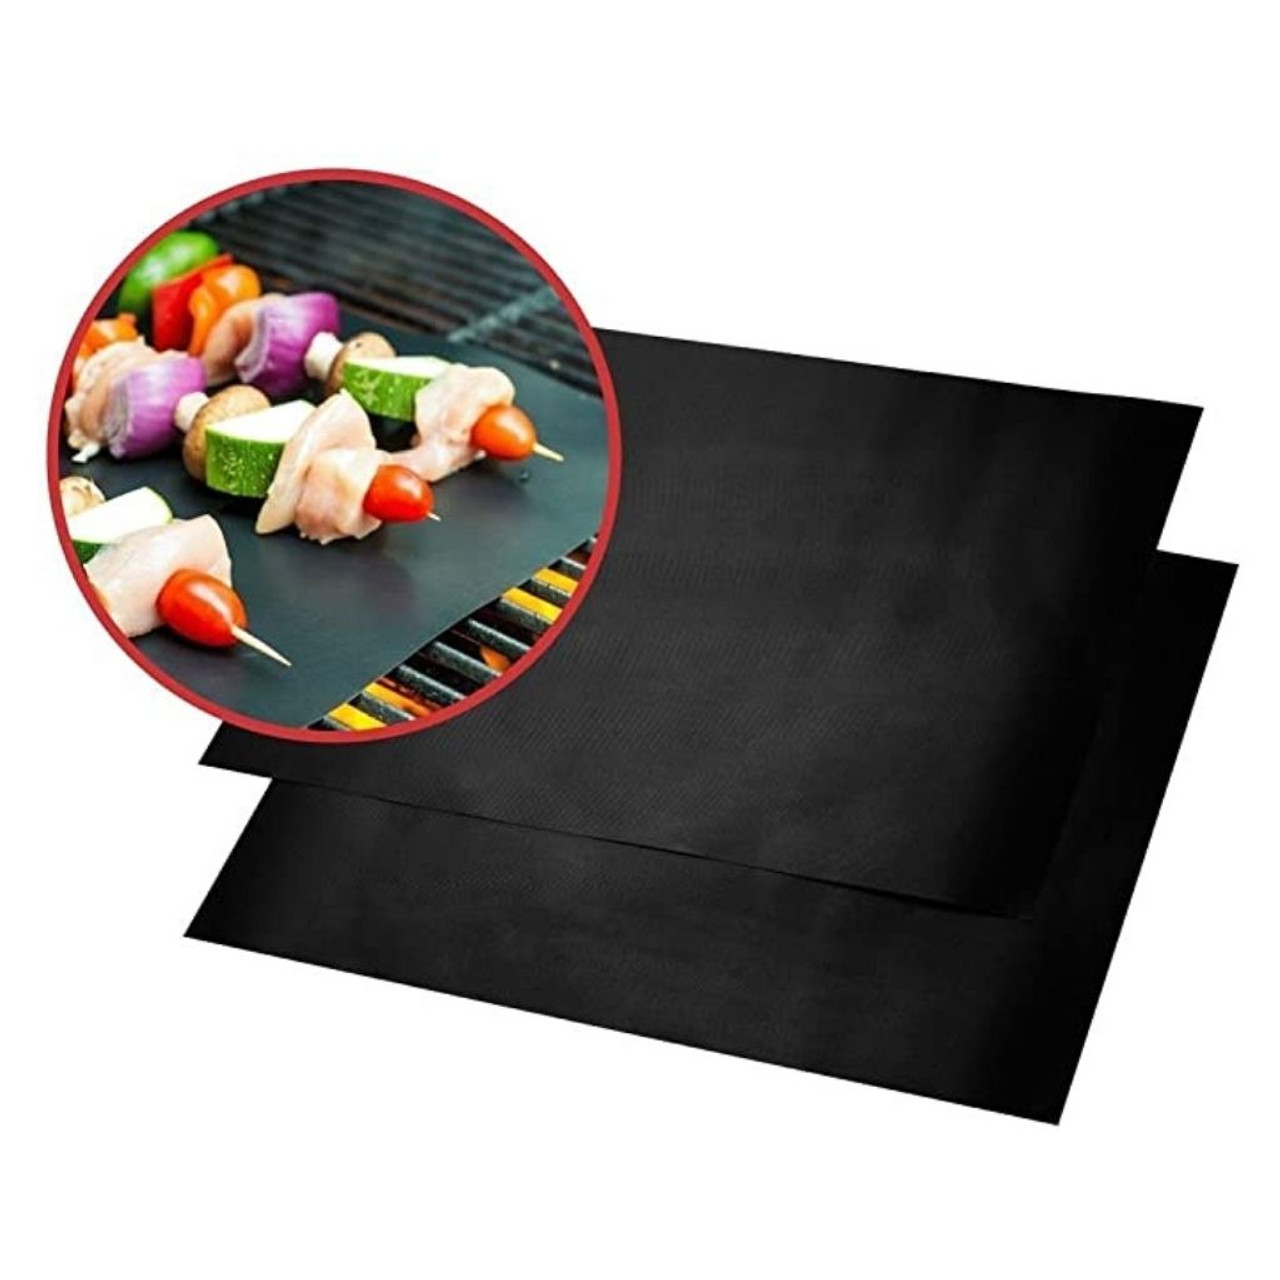 Heavy-Duty Non-Stick Cooking/BBQ Mat for Grilling and Baking (3-Pack) product image